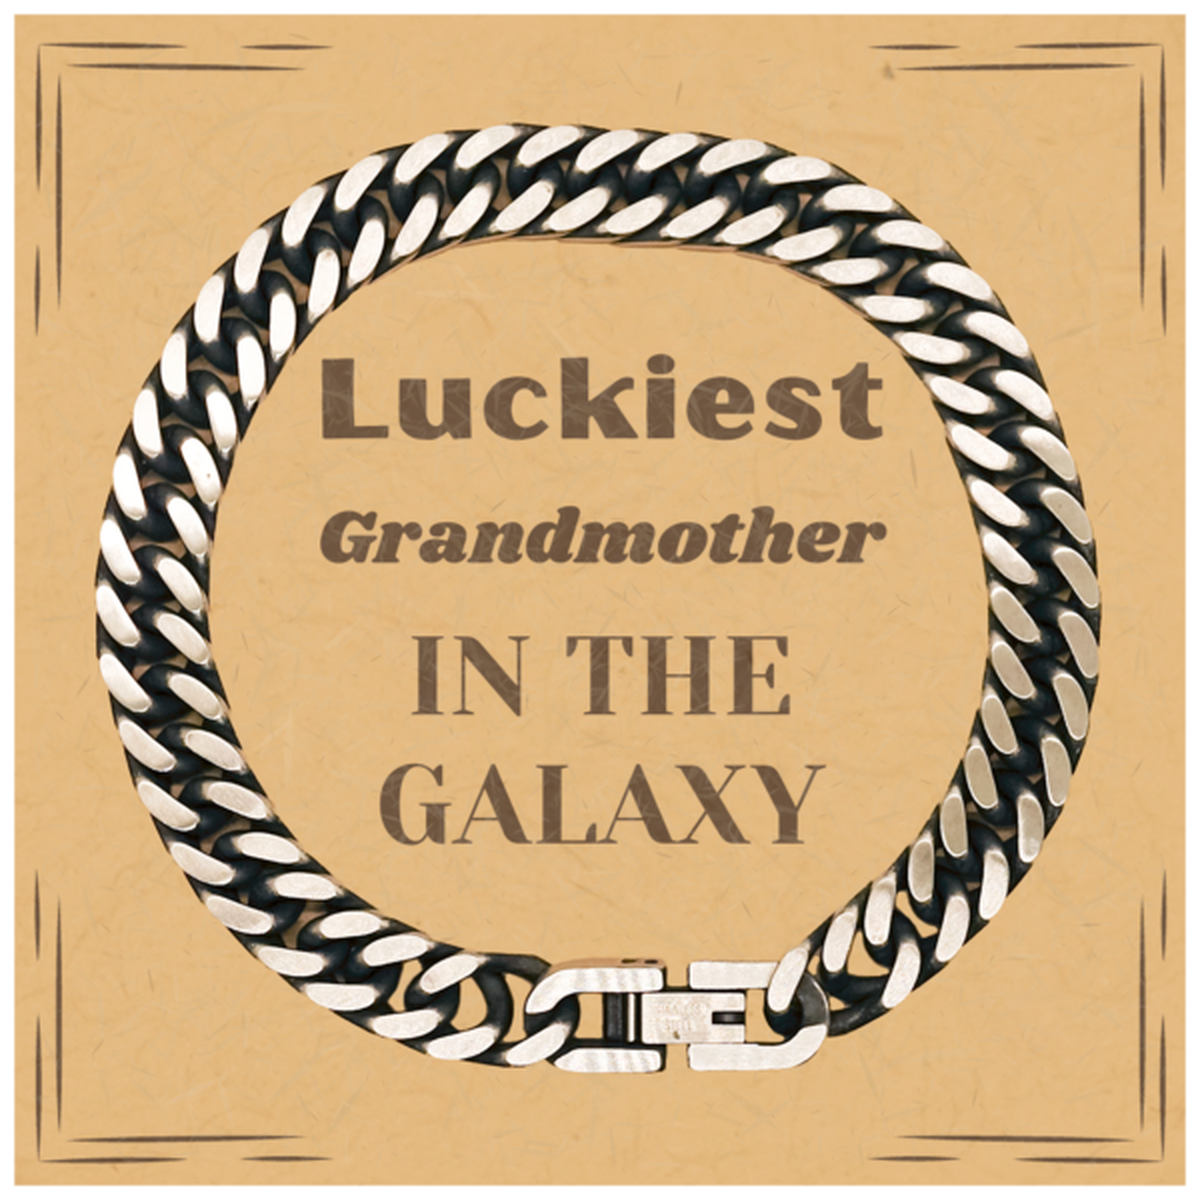 Luckiest Grandmother in the Galaxy, To My Grandmother Message Card Gifts, Christmas Grandmother Cuban Link Chain Bracelet Gifts, X-mas Birthday Unique Gifts For Grandmother Men Women